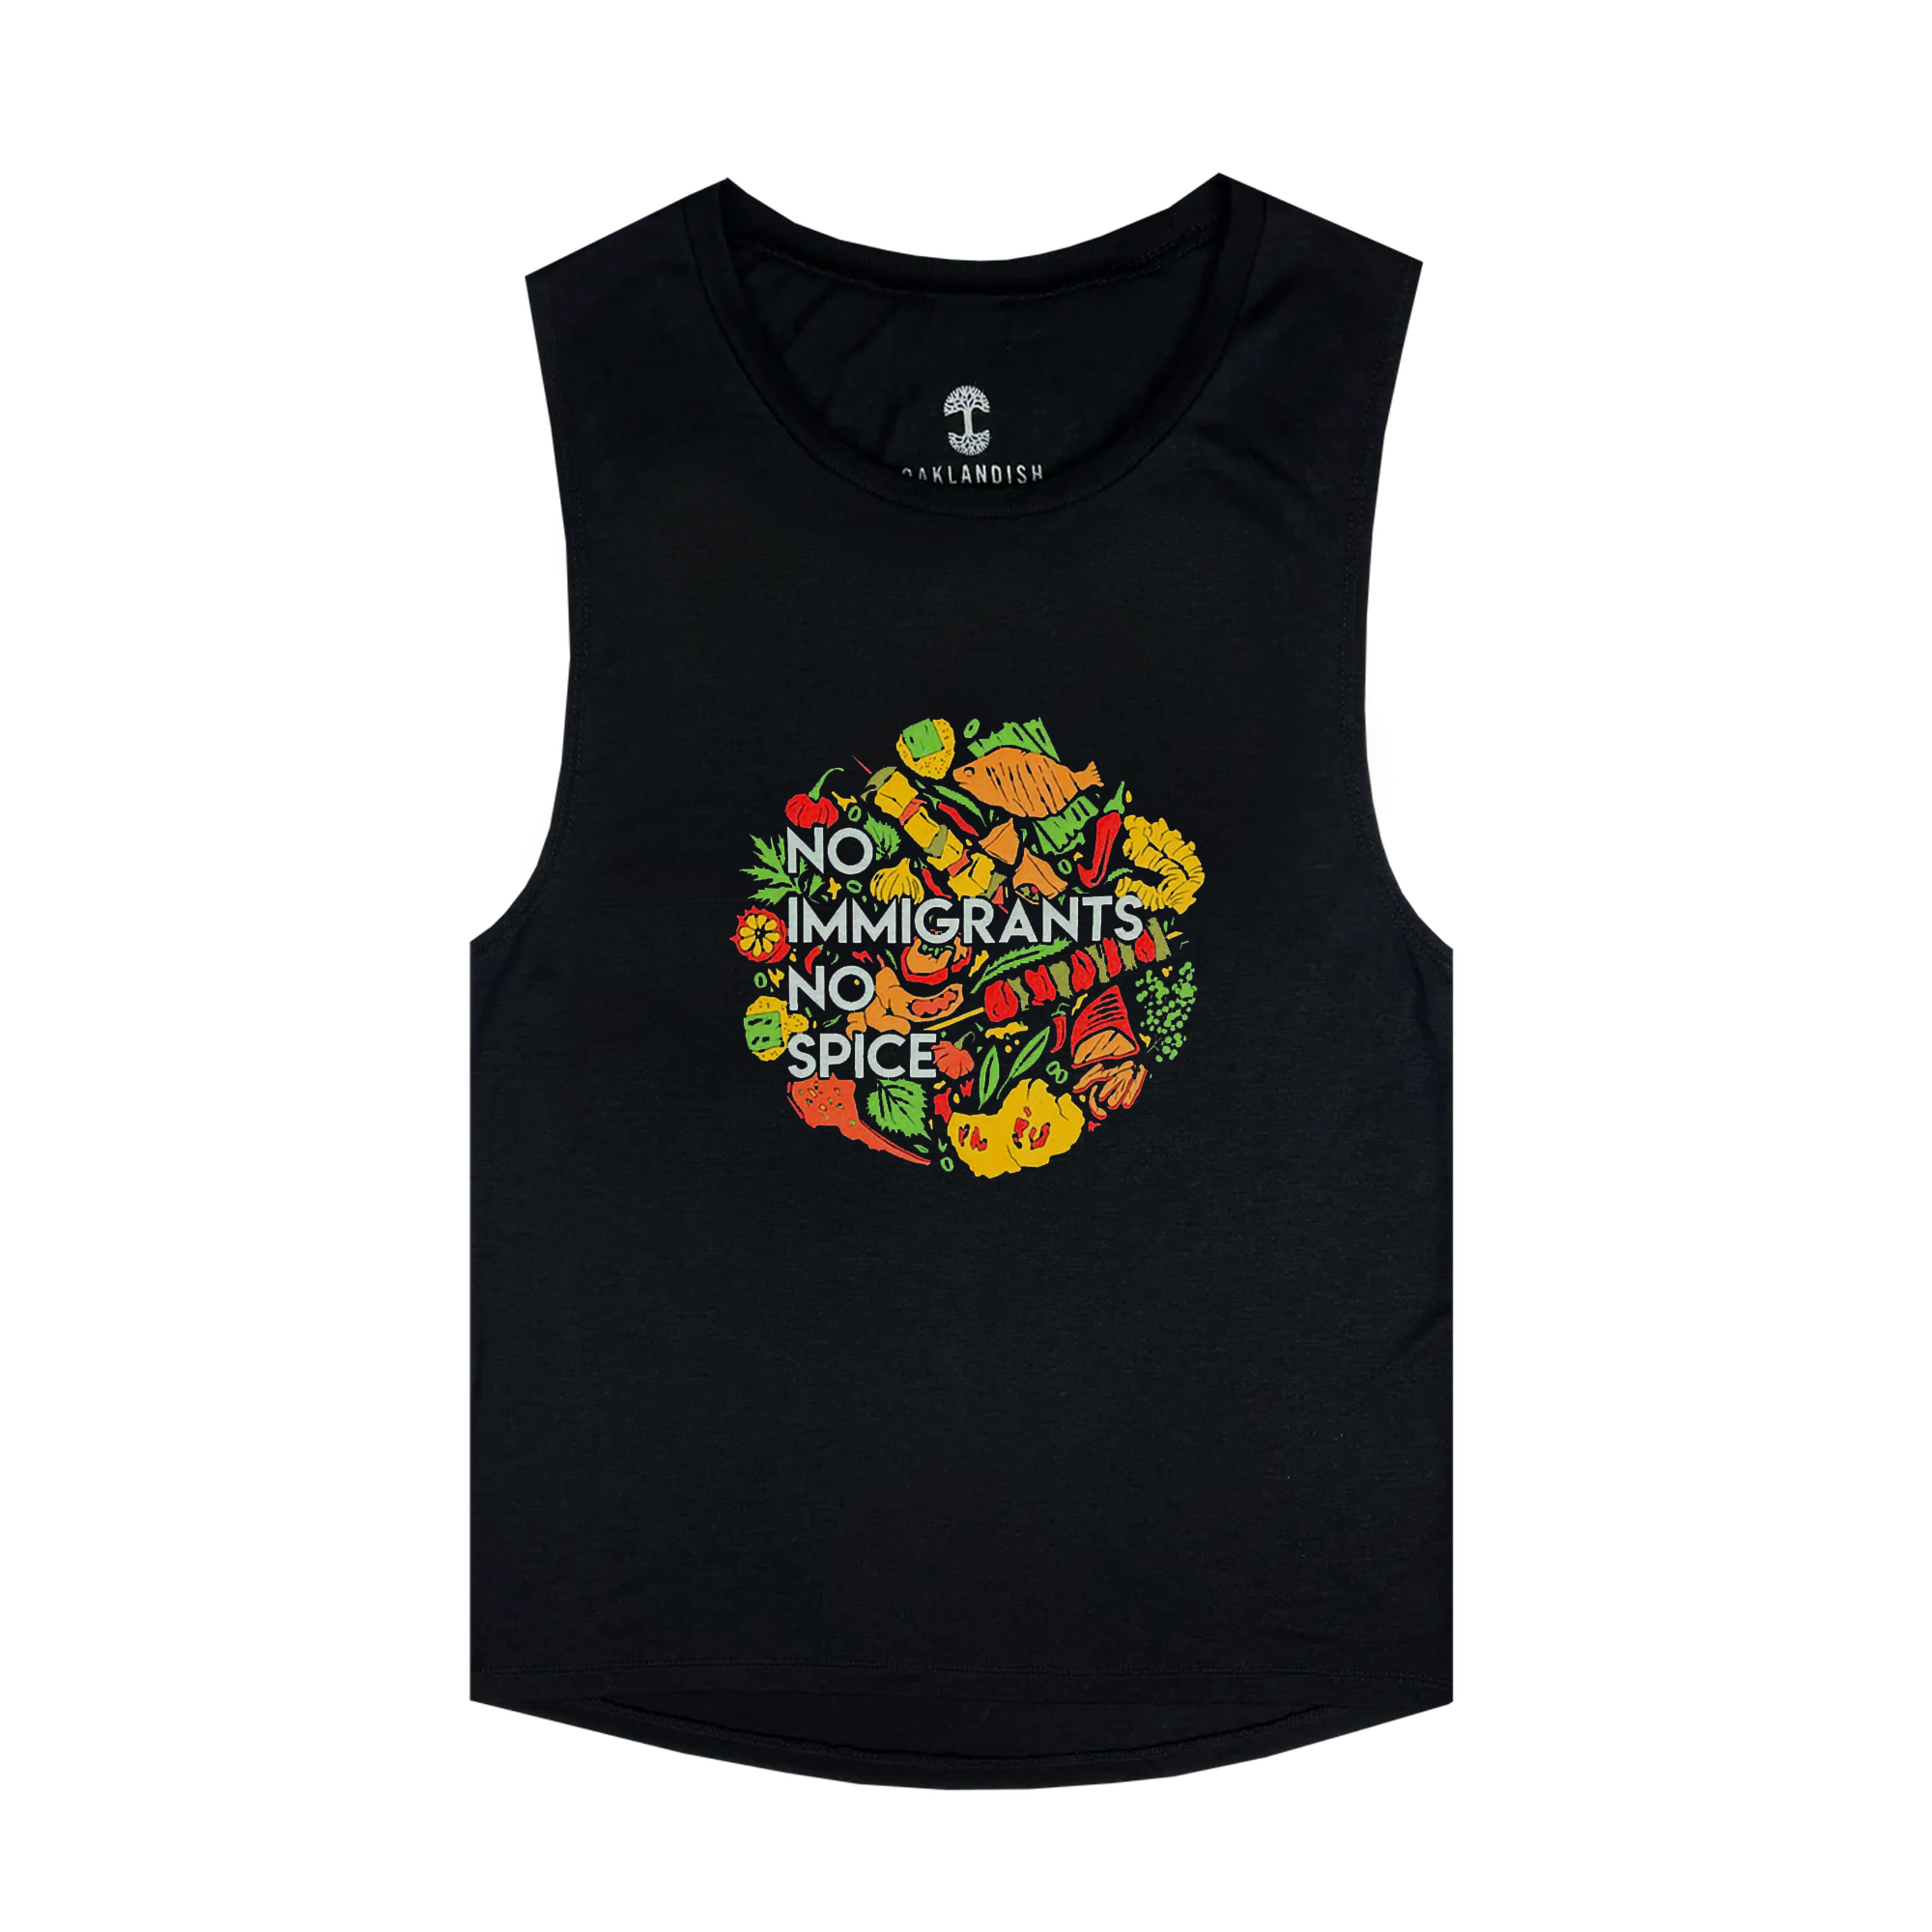 Women's black tank top with white NO IMMIGRANTS NO SPICE wordmark on full-color global BBQ graphic on the front chest.